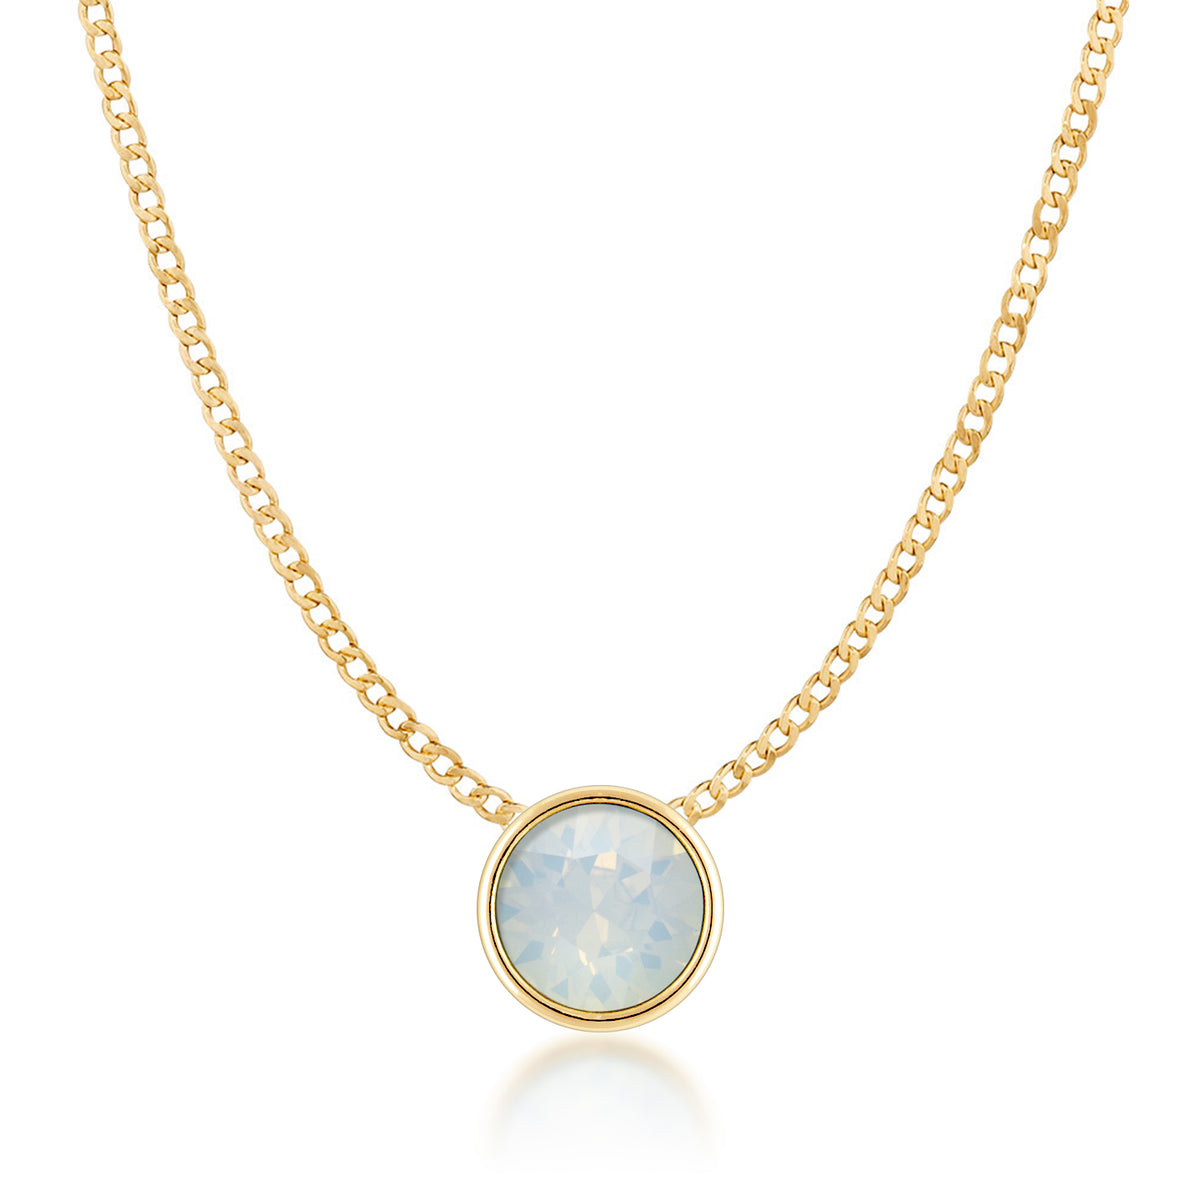 Harley Small Pendant Necklace with Ivory White Round Opals from Swarovski Gold Plated - Ed Heart